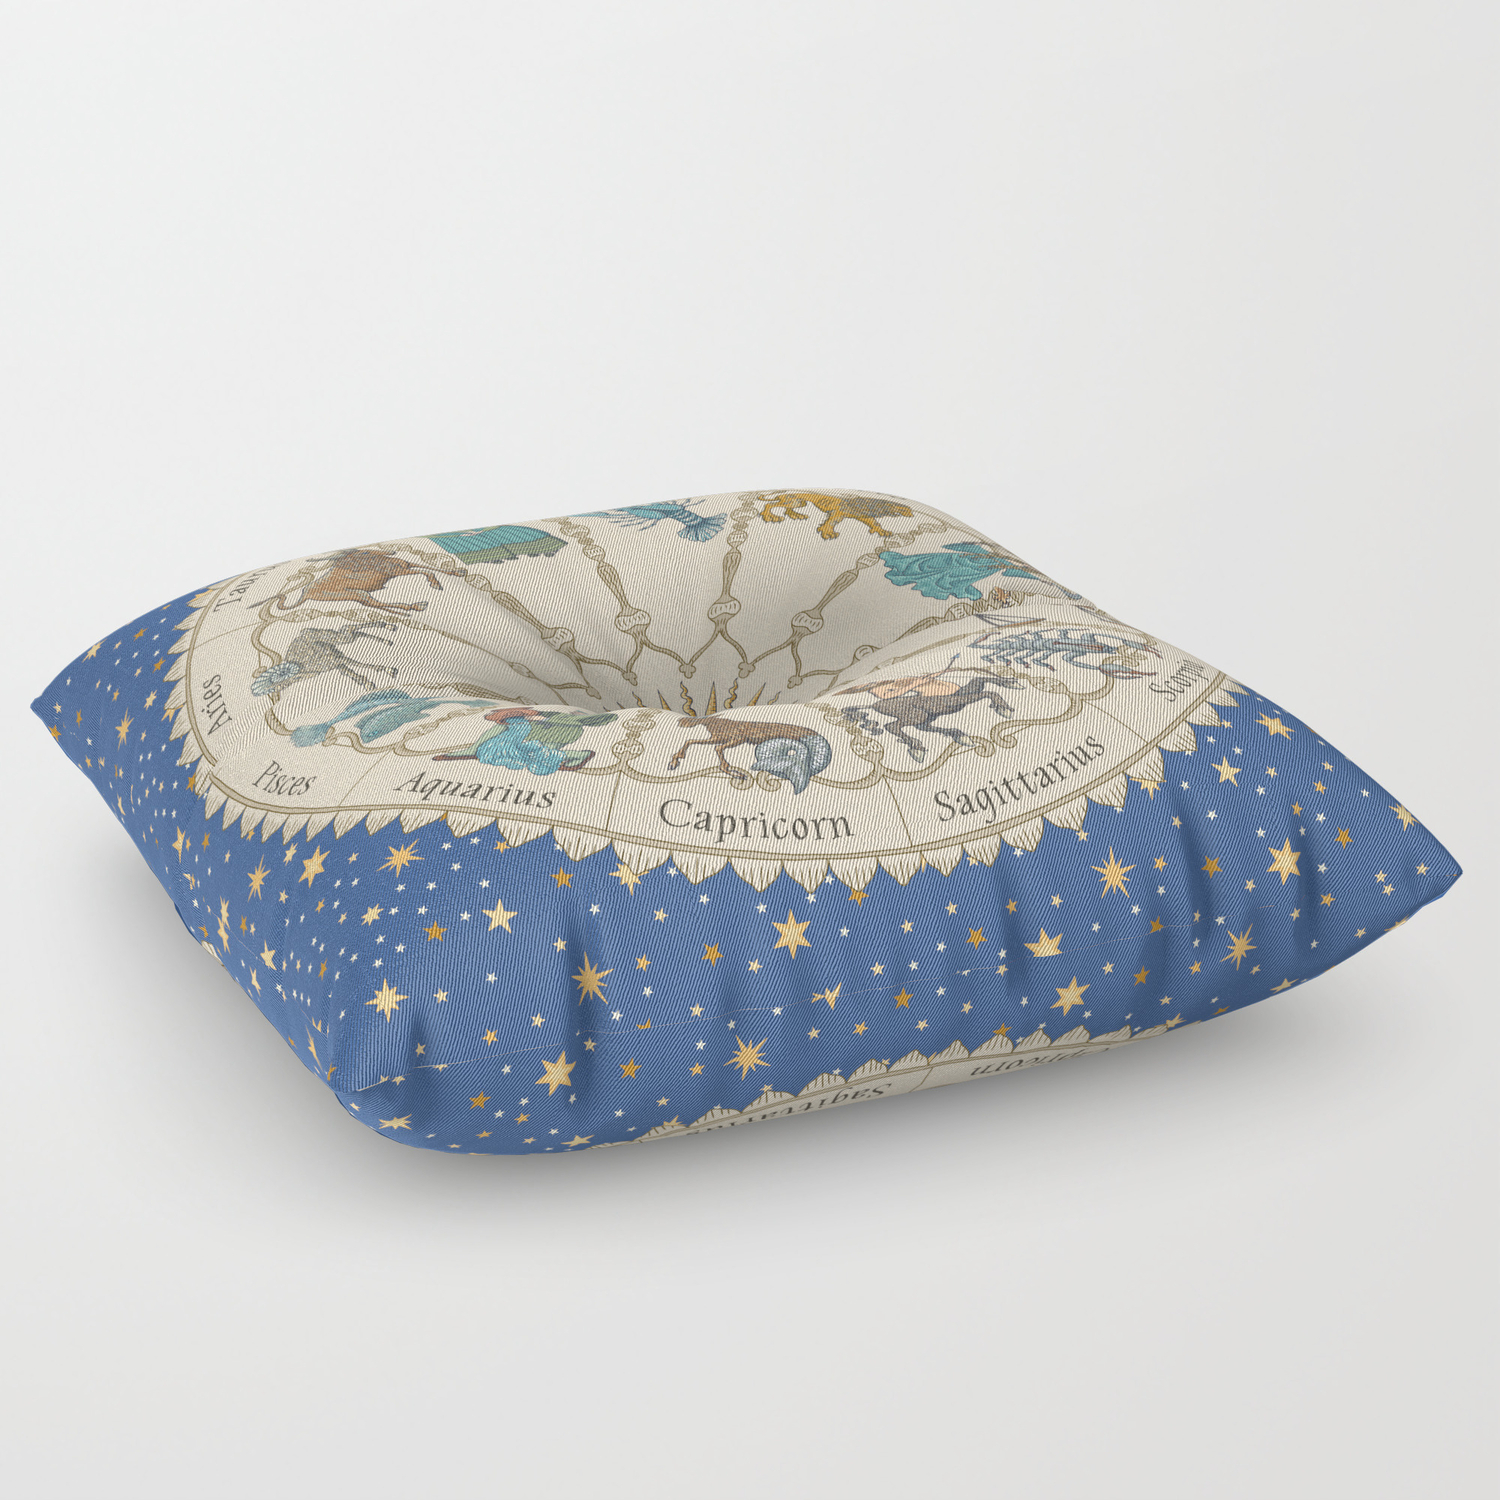 Details about   Beautiful Zodiac Sunsign Design Square Floor Cushion Cover Cotton 35 Inches Art